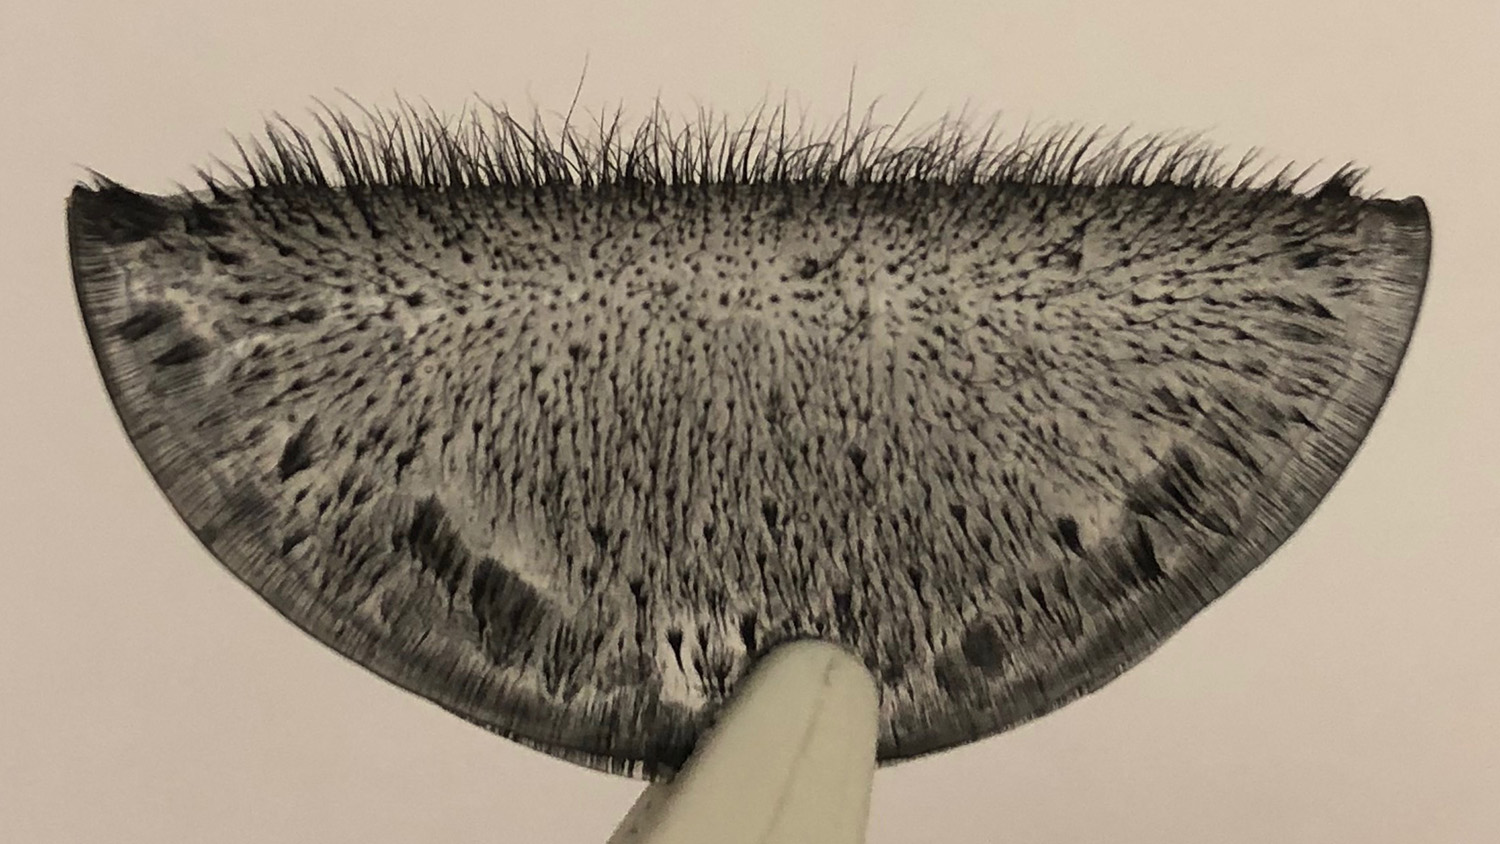 Photograph of an array of magnetic cilia, folded and held in the tip of tweezers. Photo credit: Jessica A.-C. Liu.